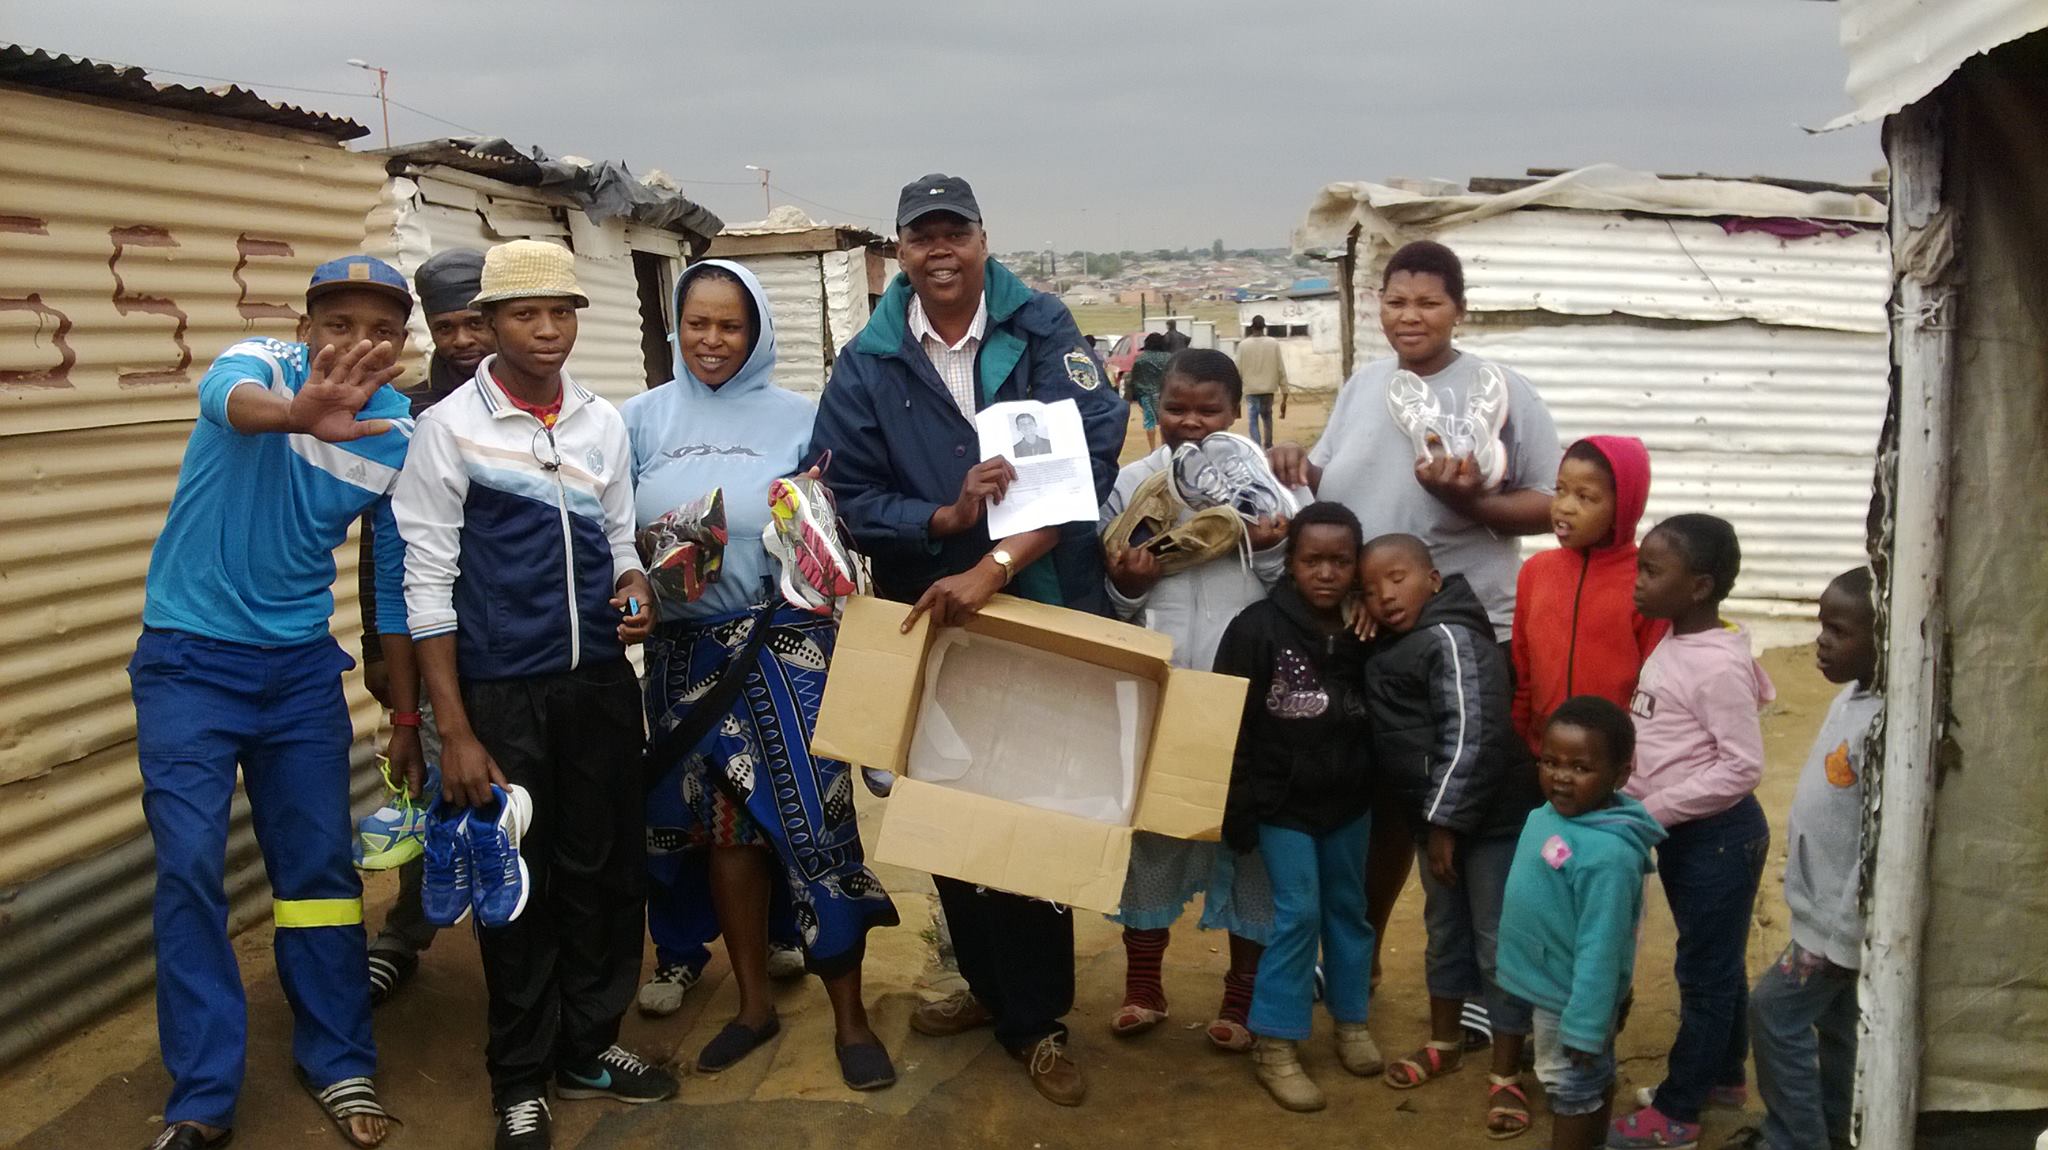 Families receiving shoes in Soweto, South Africa